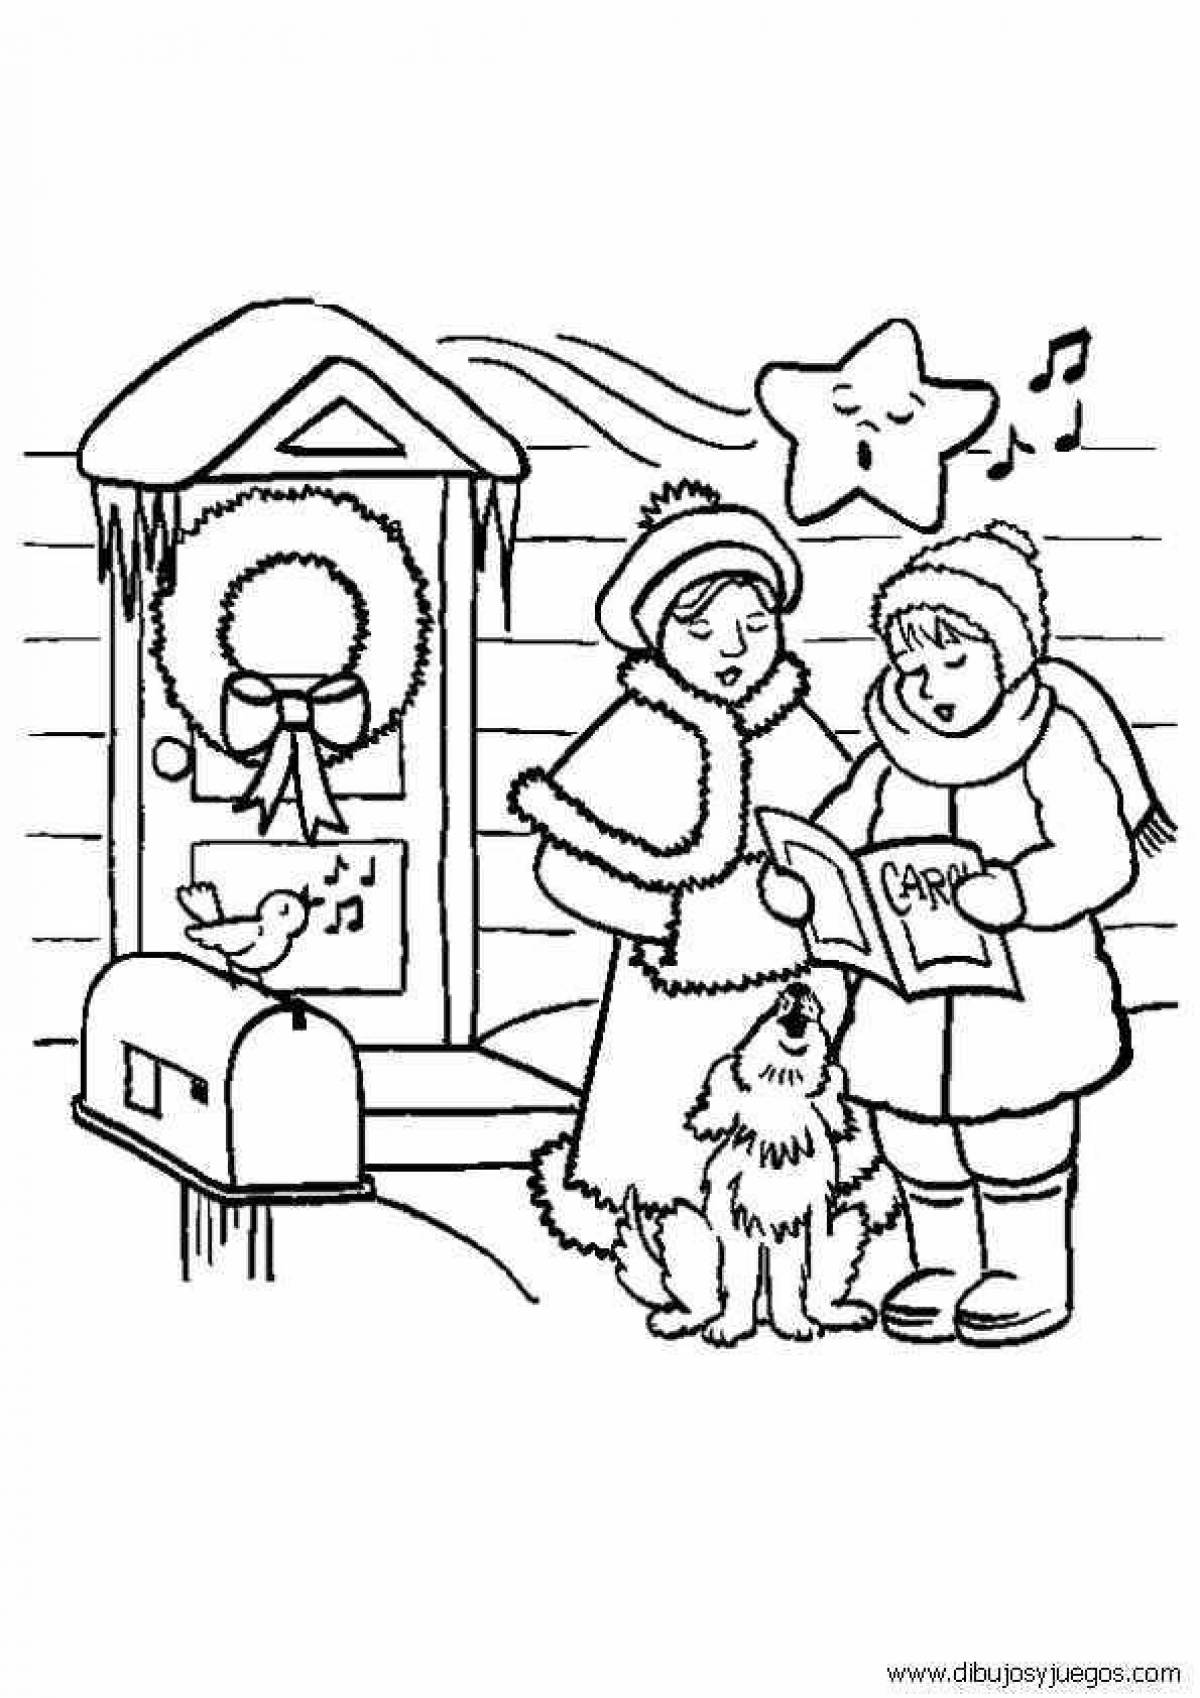 Sublime carol coloring pages